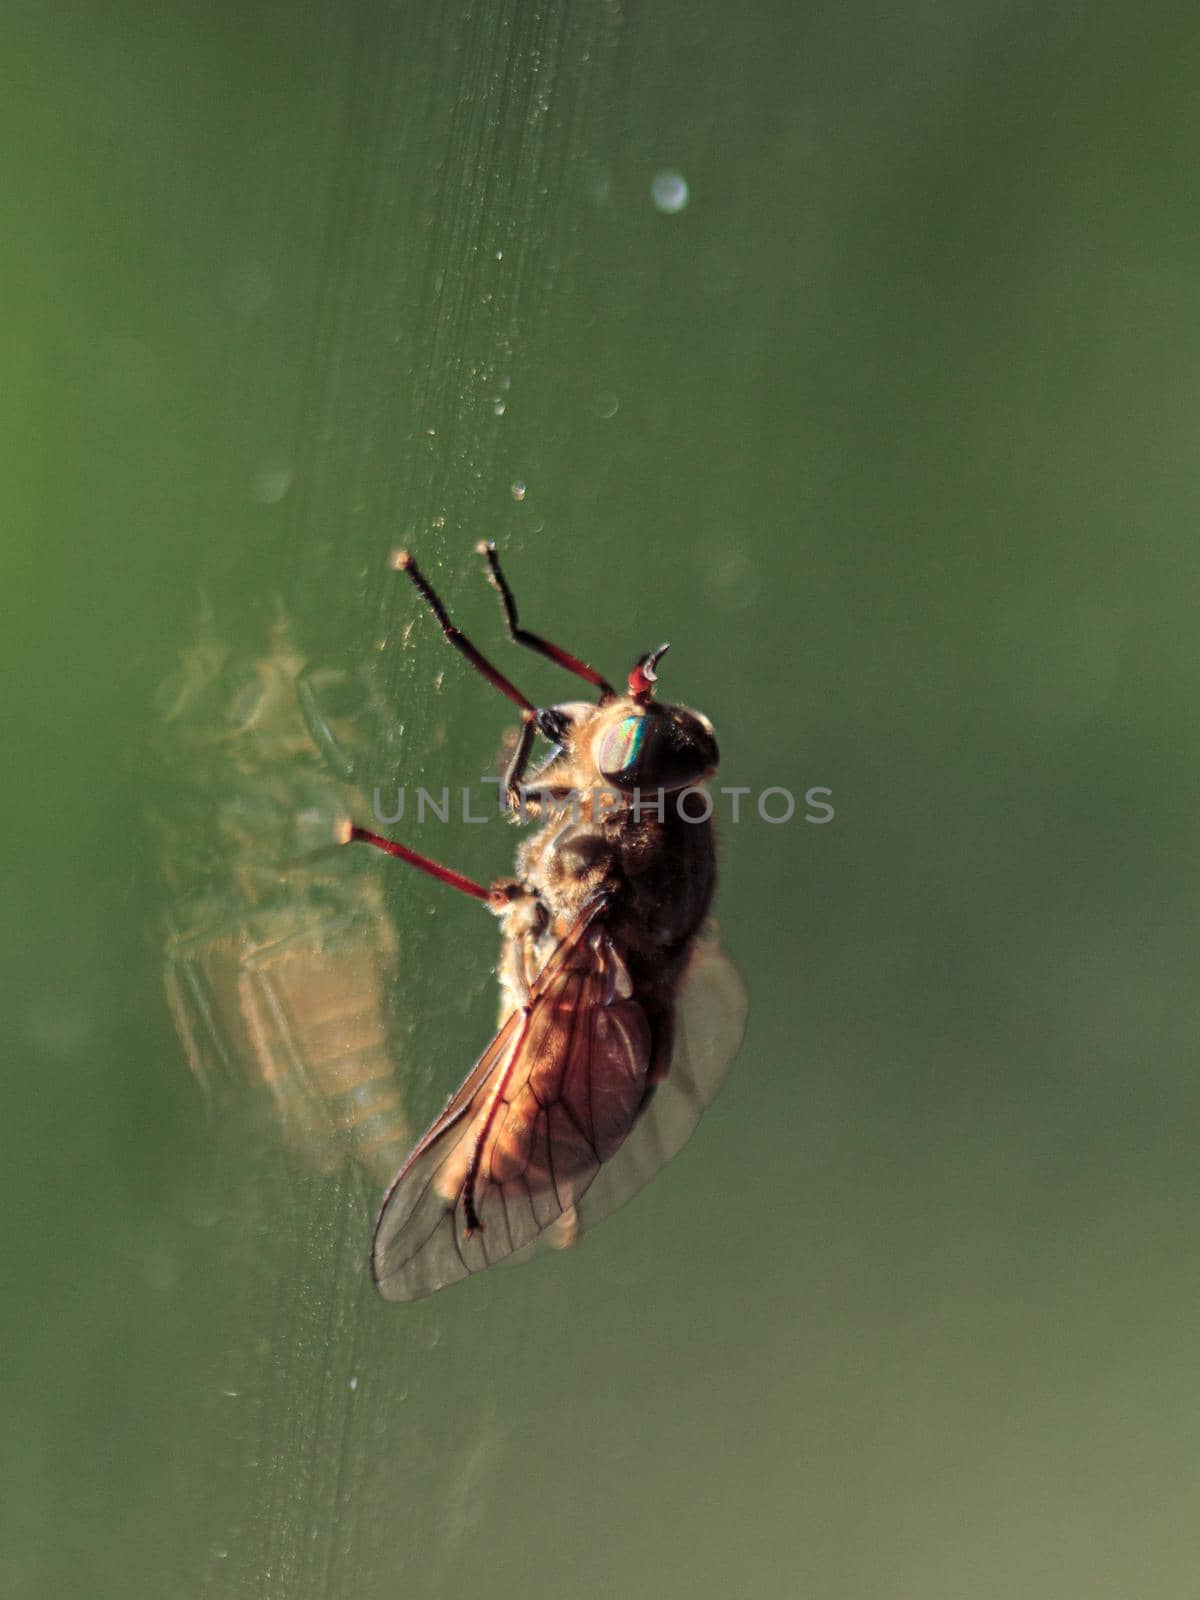 Fly sitting on window glass, colorful insect eyes